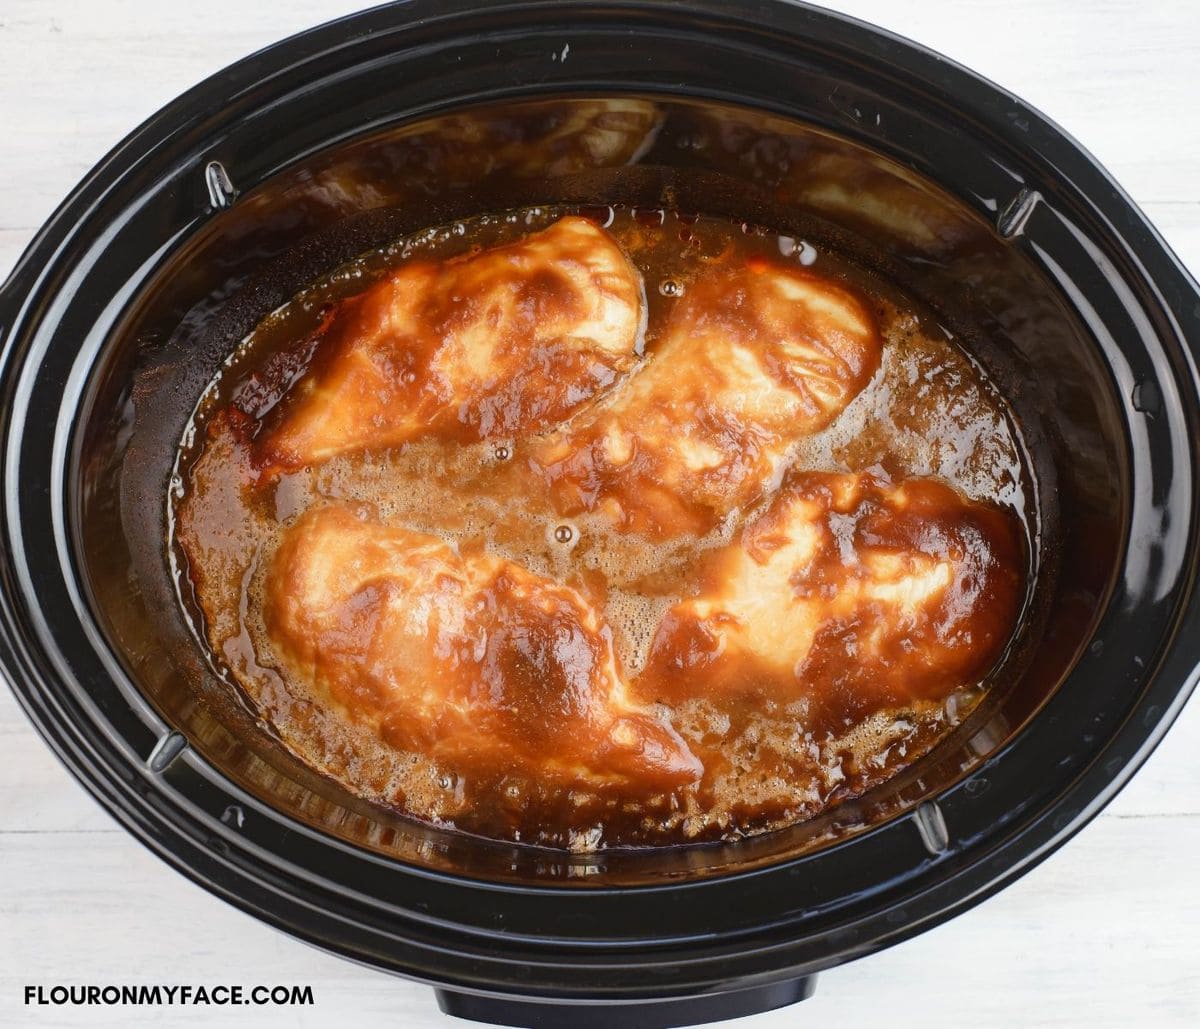 Crock Pot Barbecued Chicken before shredding in a slow cooker.